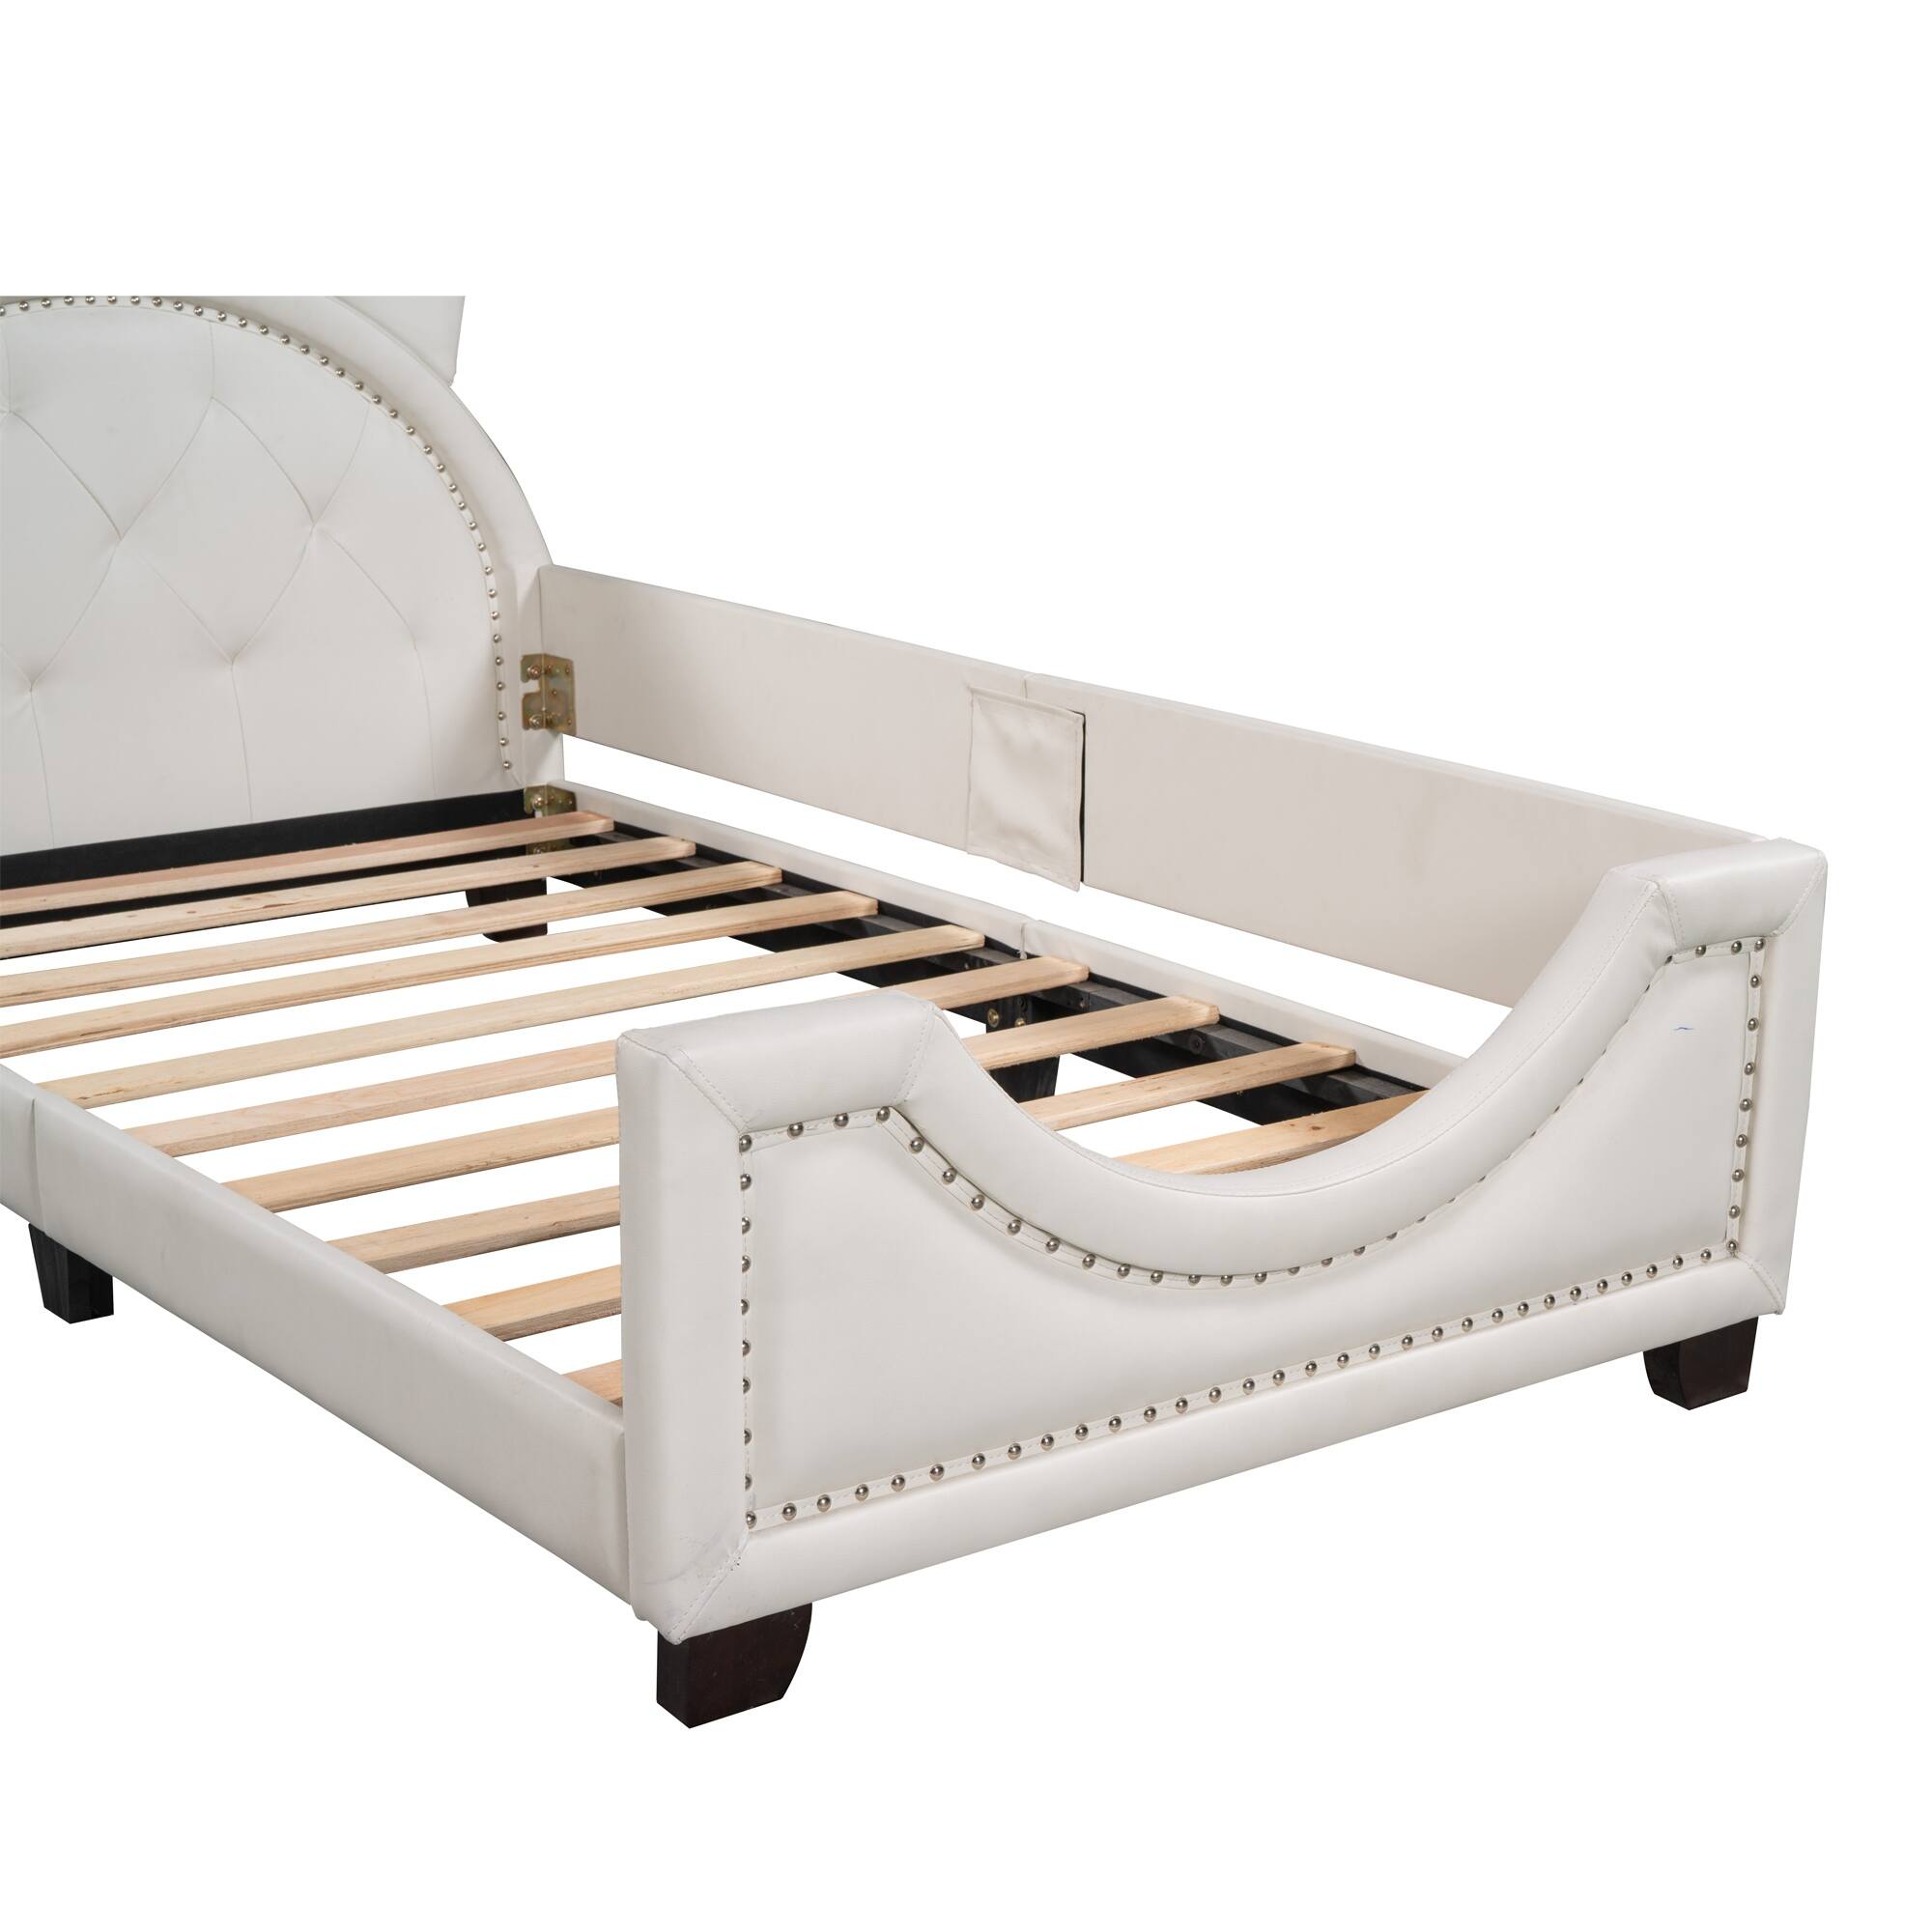 Twin Size Upholstered Daybed with Carton Ears Headboard, Rabbit-Shaped Cute Platform Bed Frame with Button for Boys Girls